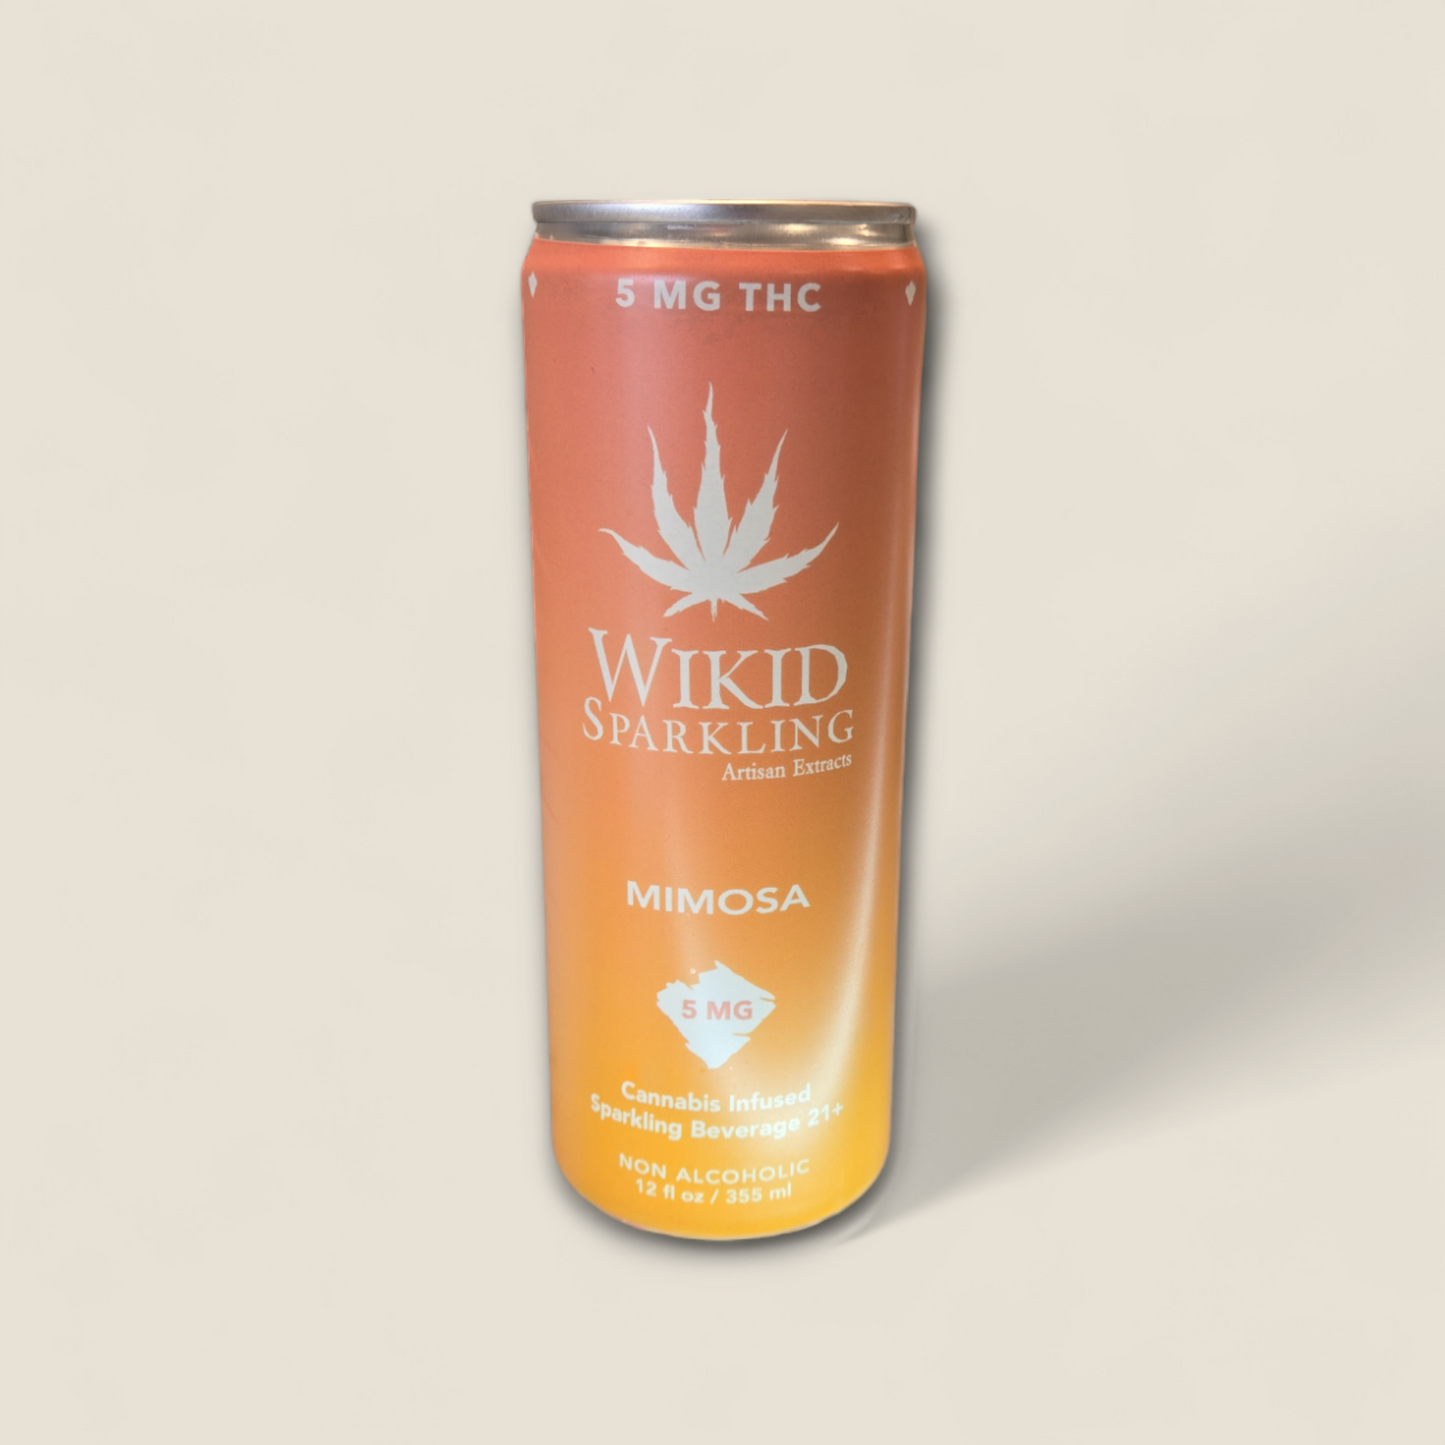 Wikid Sparkling (5mg) Drinks